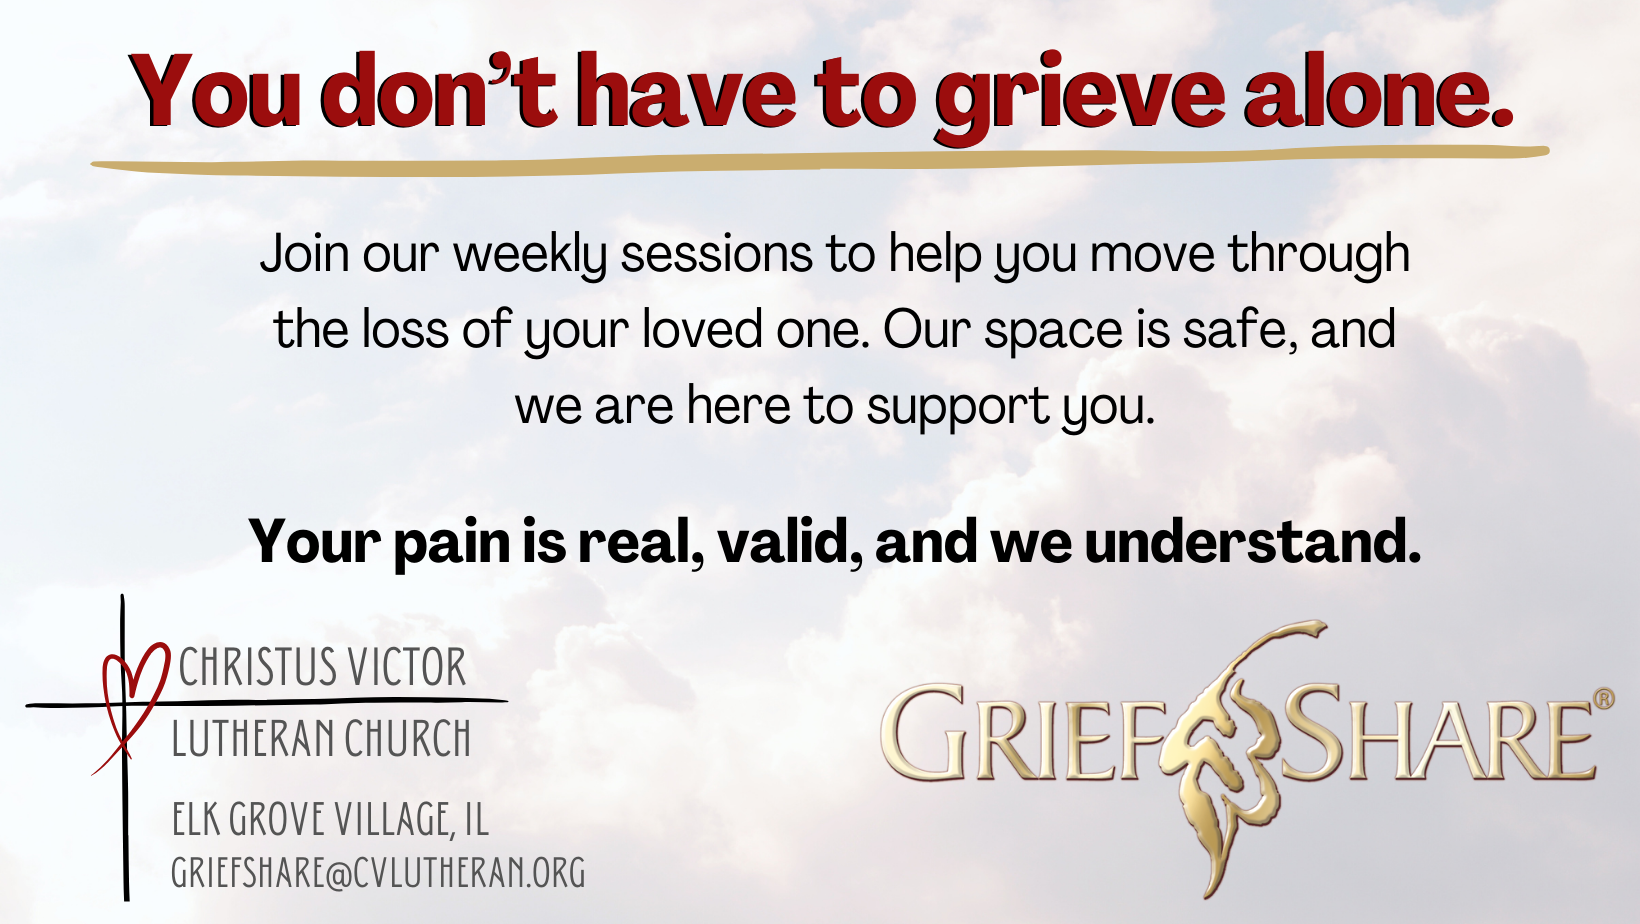 Join our weekly sessions to help you move through the loss of your loved one. Our space is safe, and we are here to support you. Your pain is real, valid, and we understand. (1).png